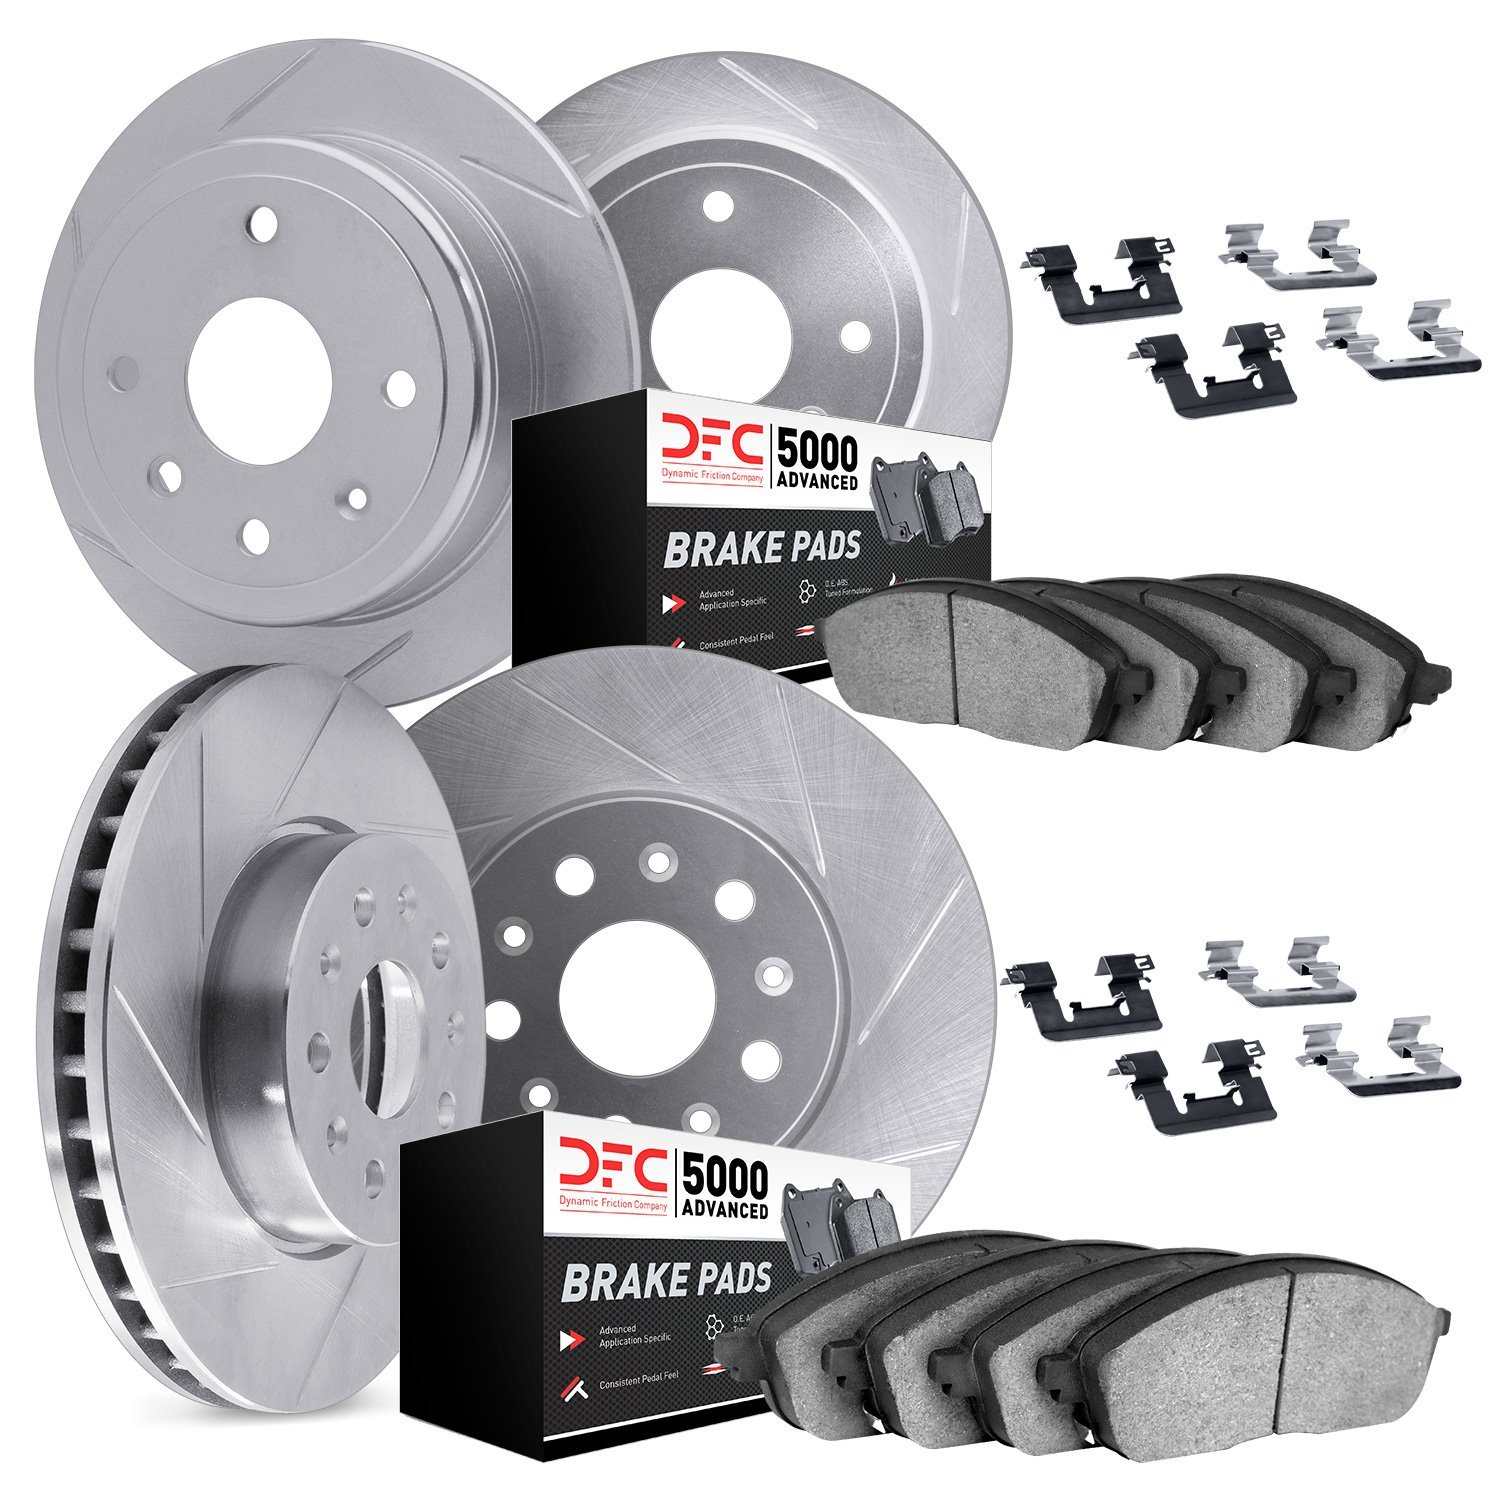 5514-59086 Slotted Brake Rotors w/5000 Advanced Brake Pads Kit & Hardware [Silver], 2017-2019 Acura/Honda, Position: Front and R